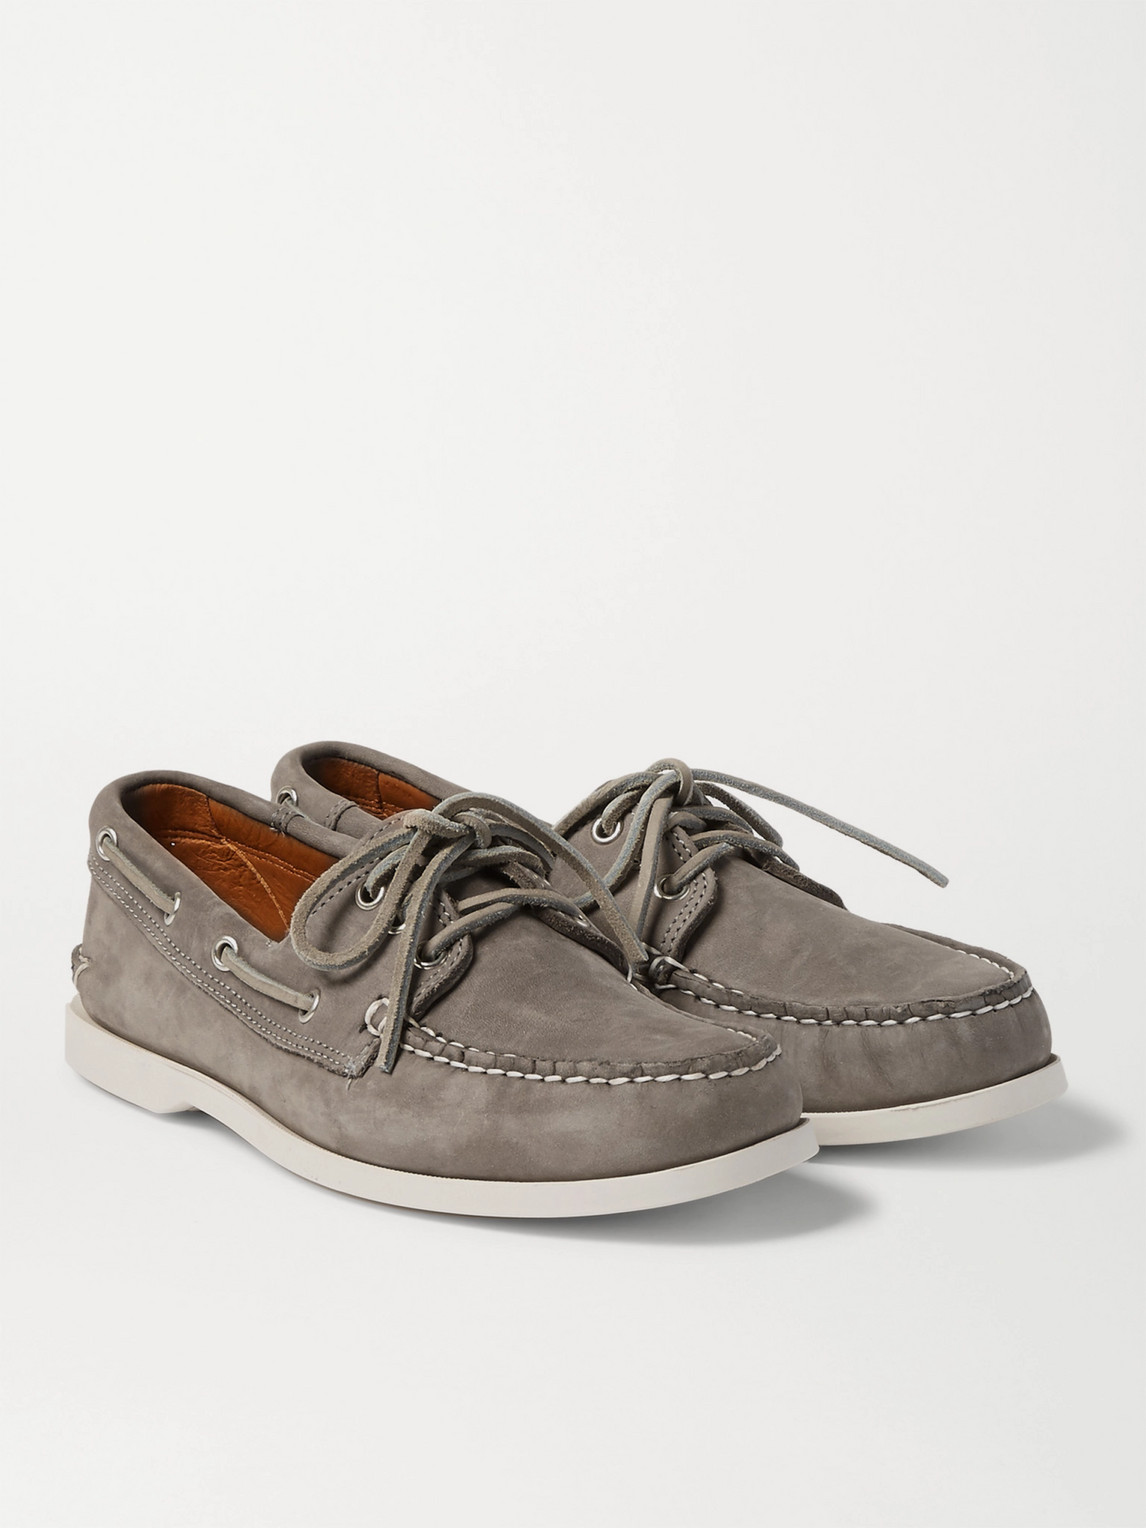 Quoddy Downeast Nubuck Boat Shoes In Gray